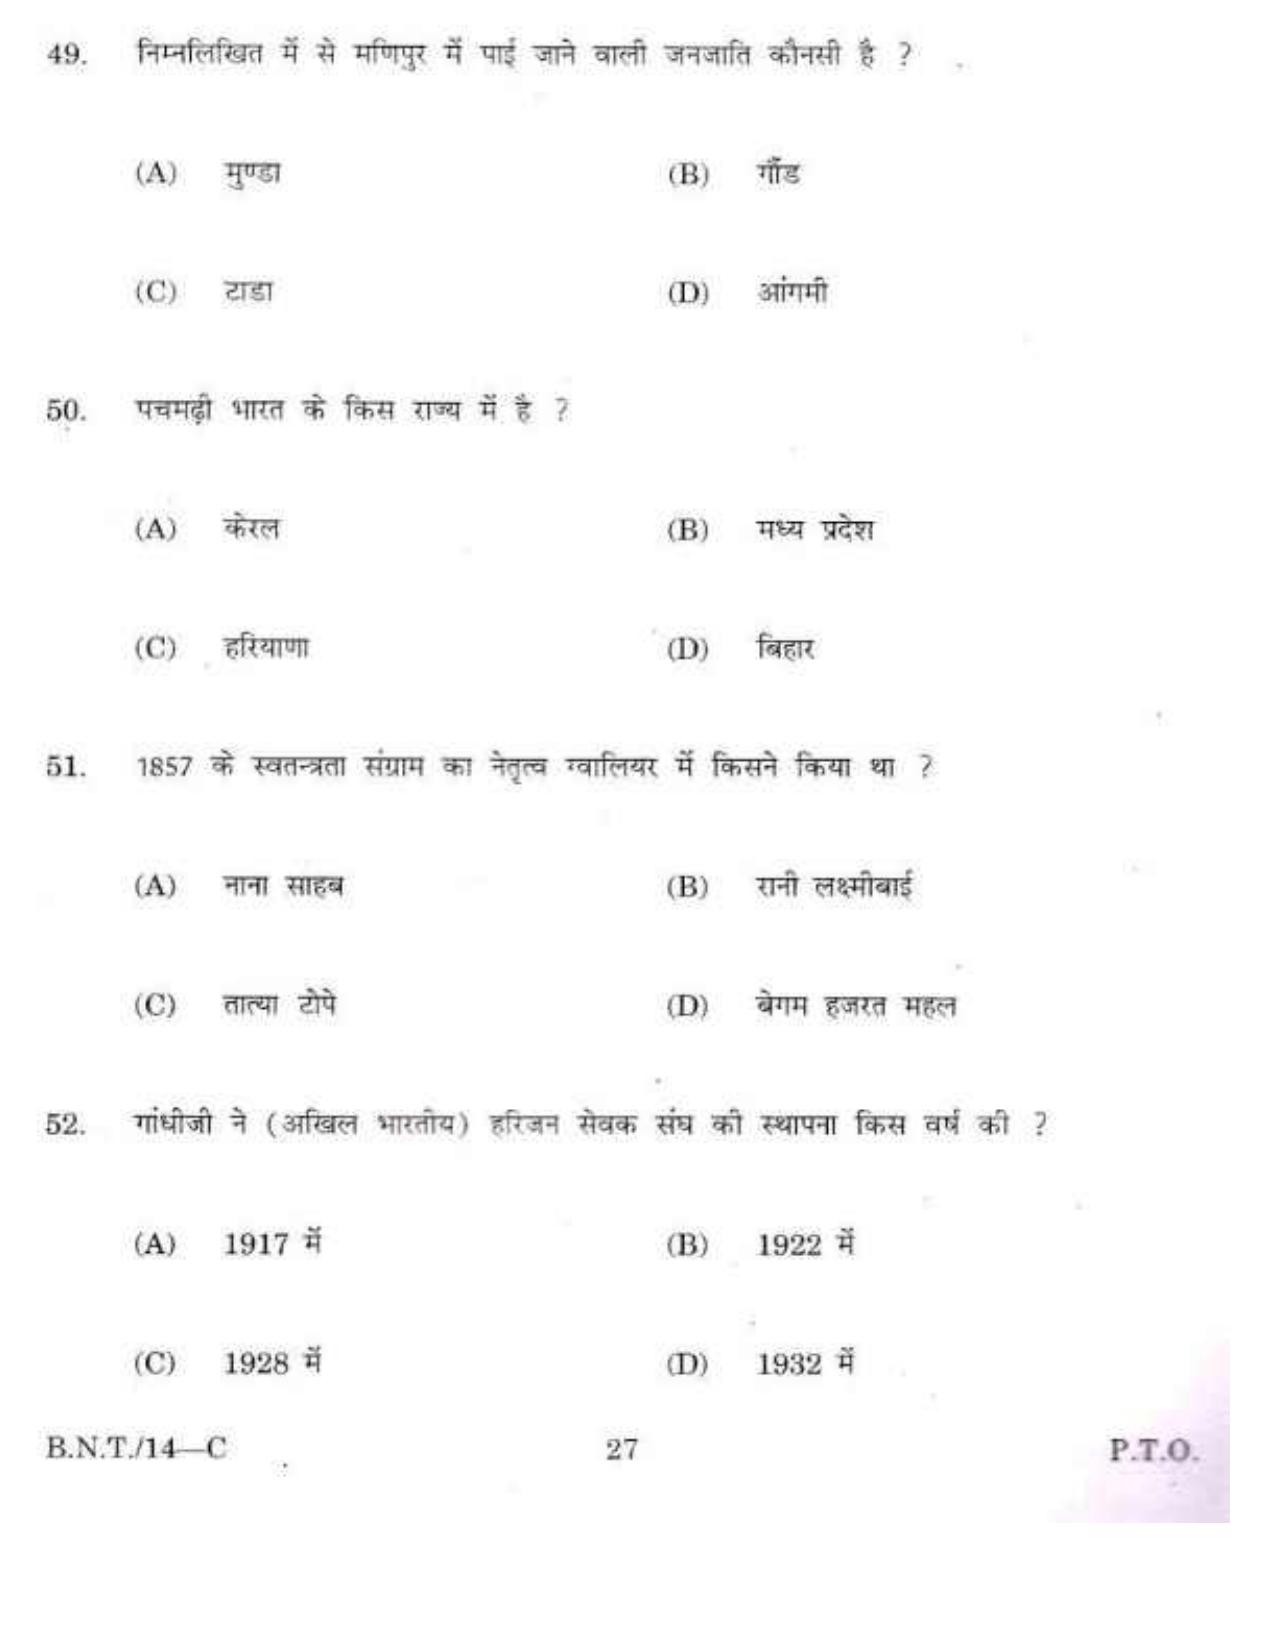 BSMFC Recovery Agent Old Question Papers for General Knowledge - Page 27